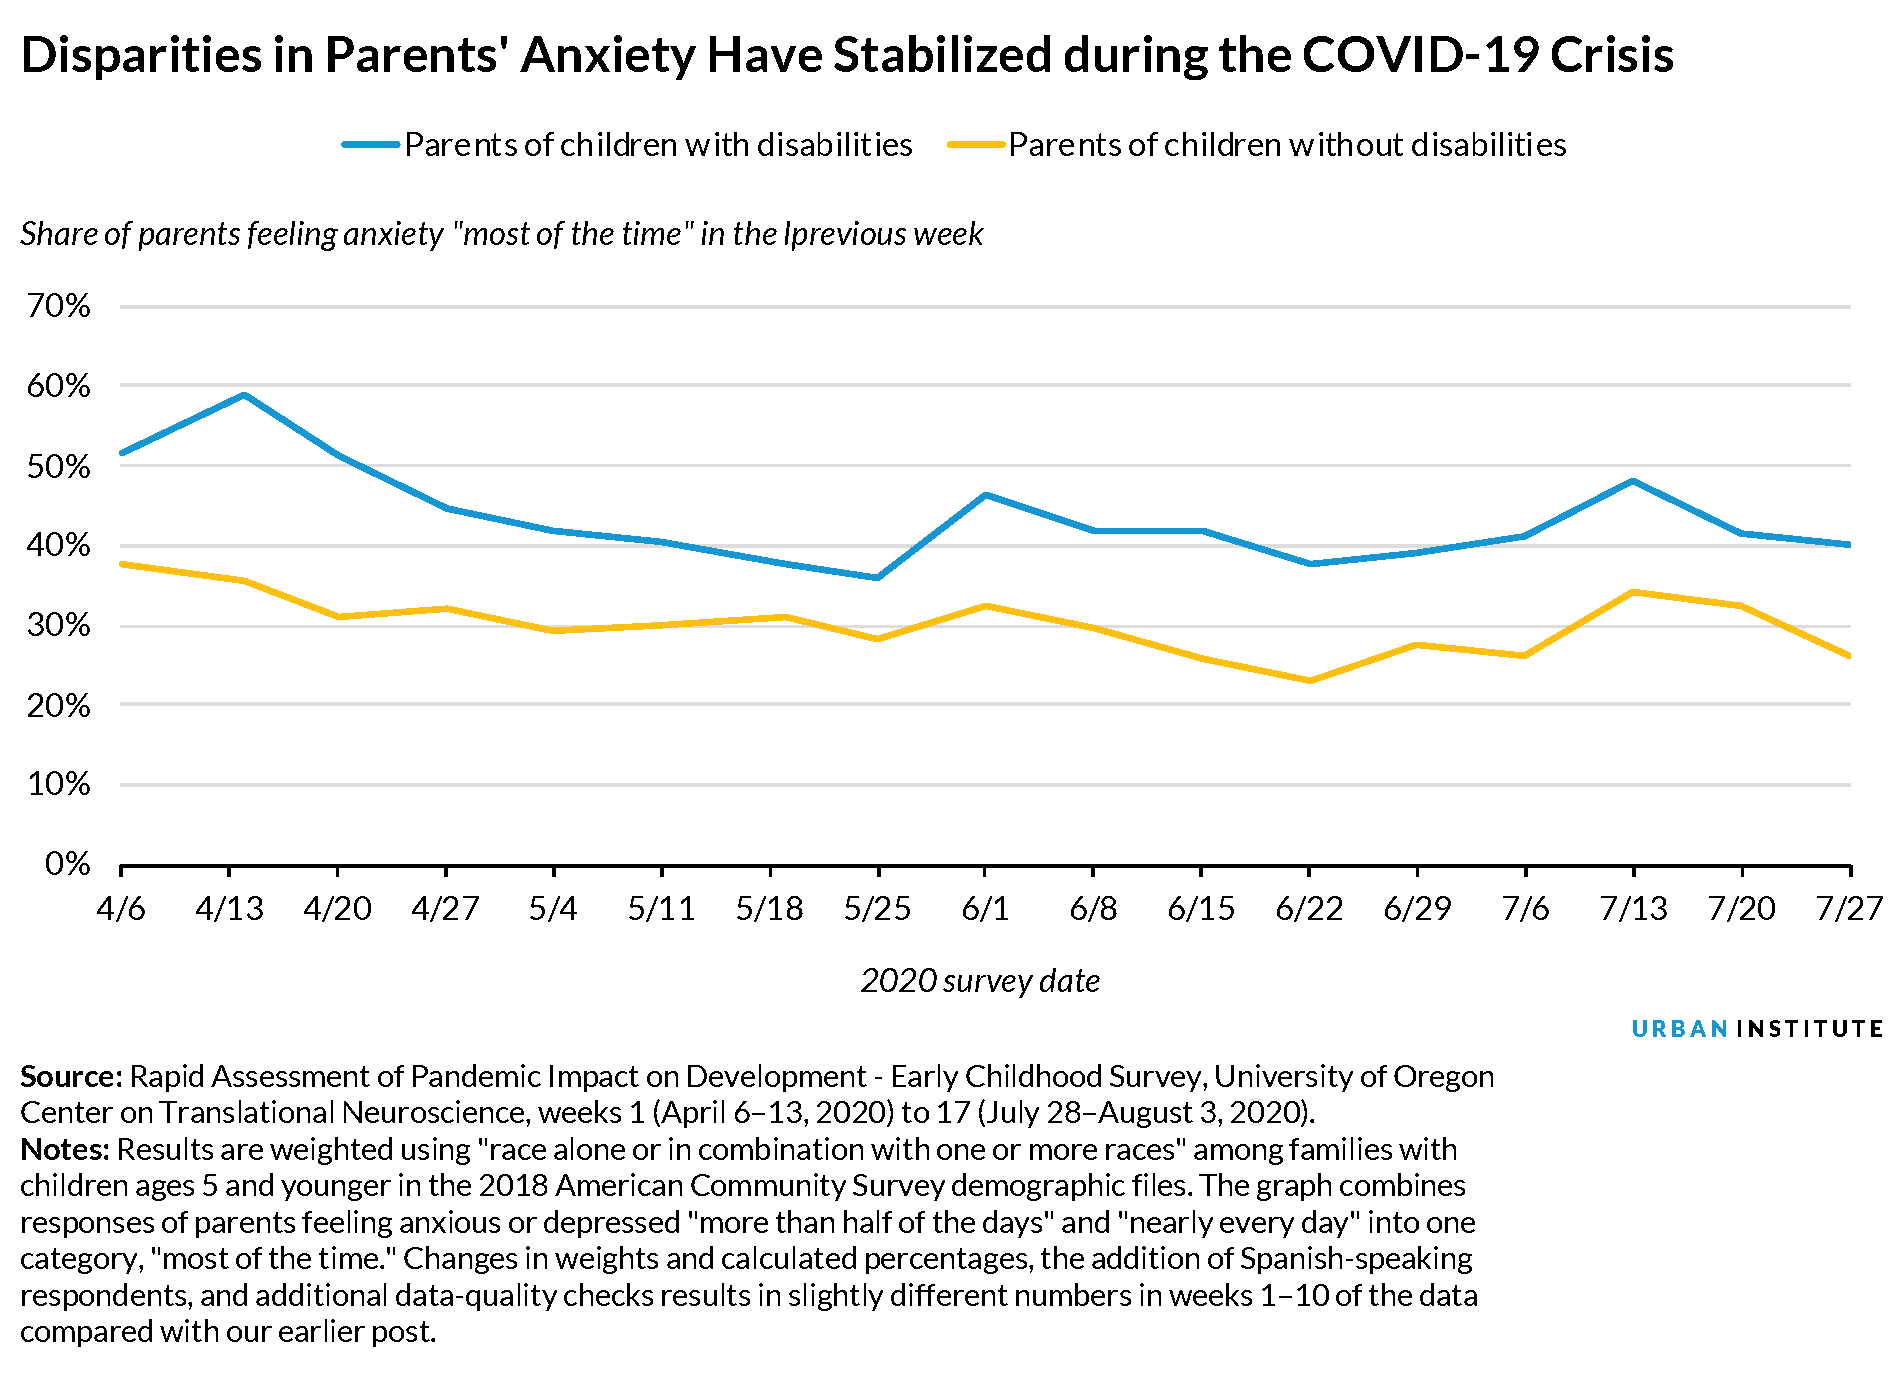 Disparities in parents' anxiety levels during COVID-19